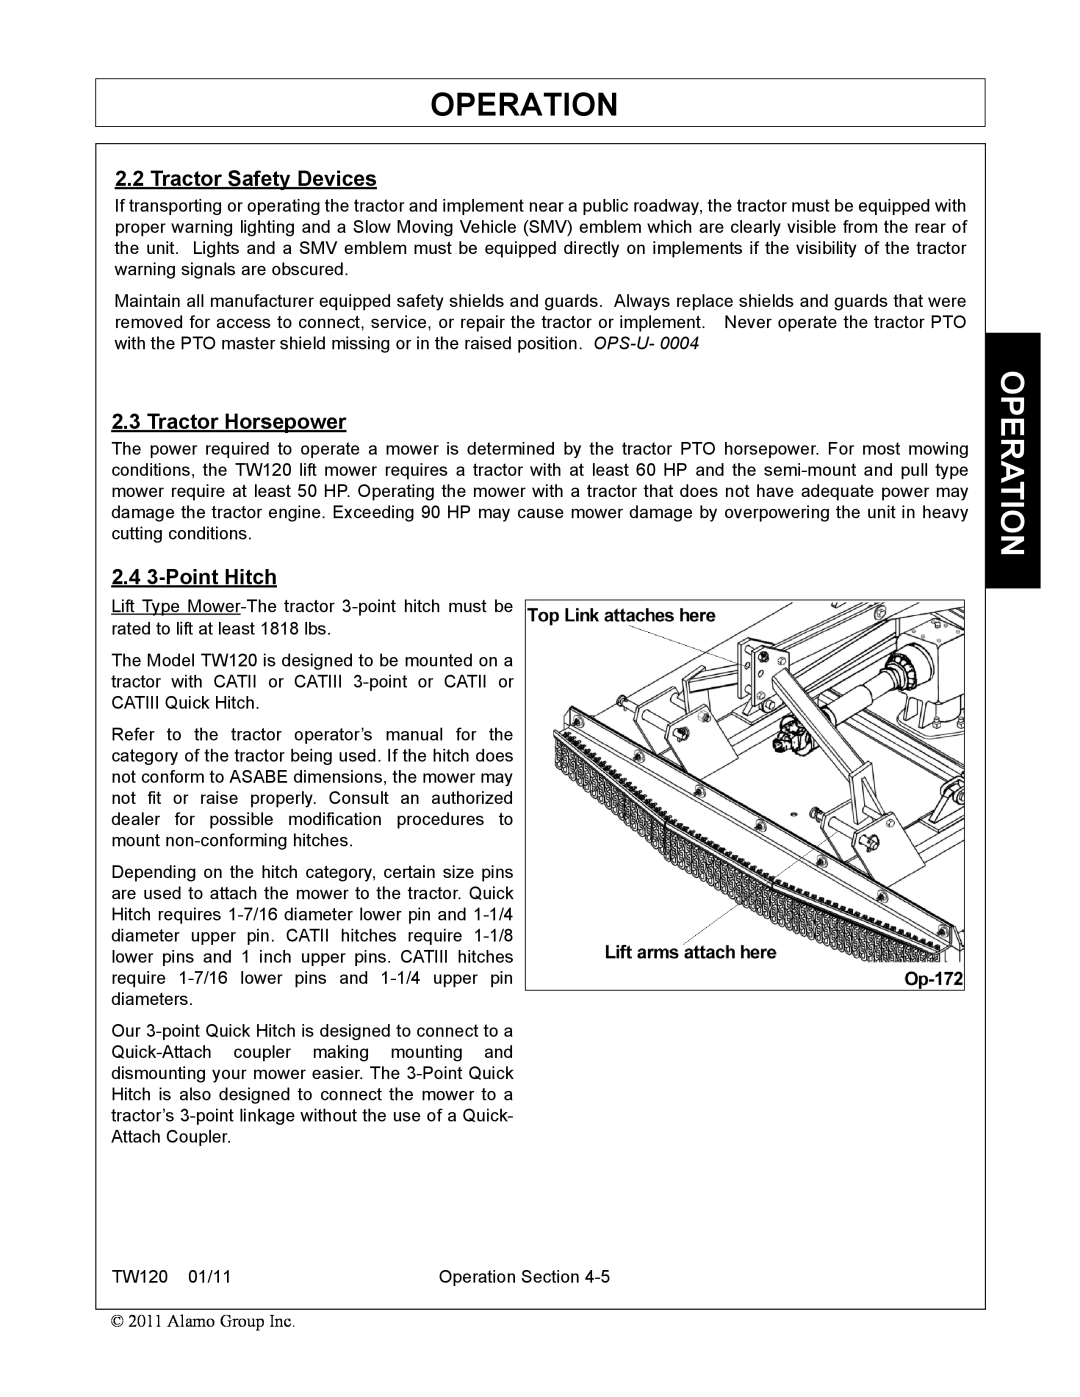 Blue Rhino FC-0025, FC-0024 manual Operation, Tractor Safety Devices, Tractor Horsepower, 2.4 3-PointHitch 